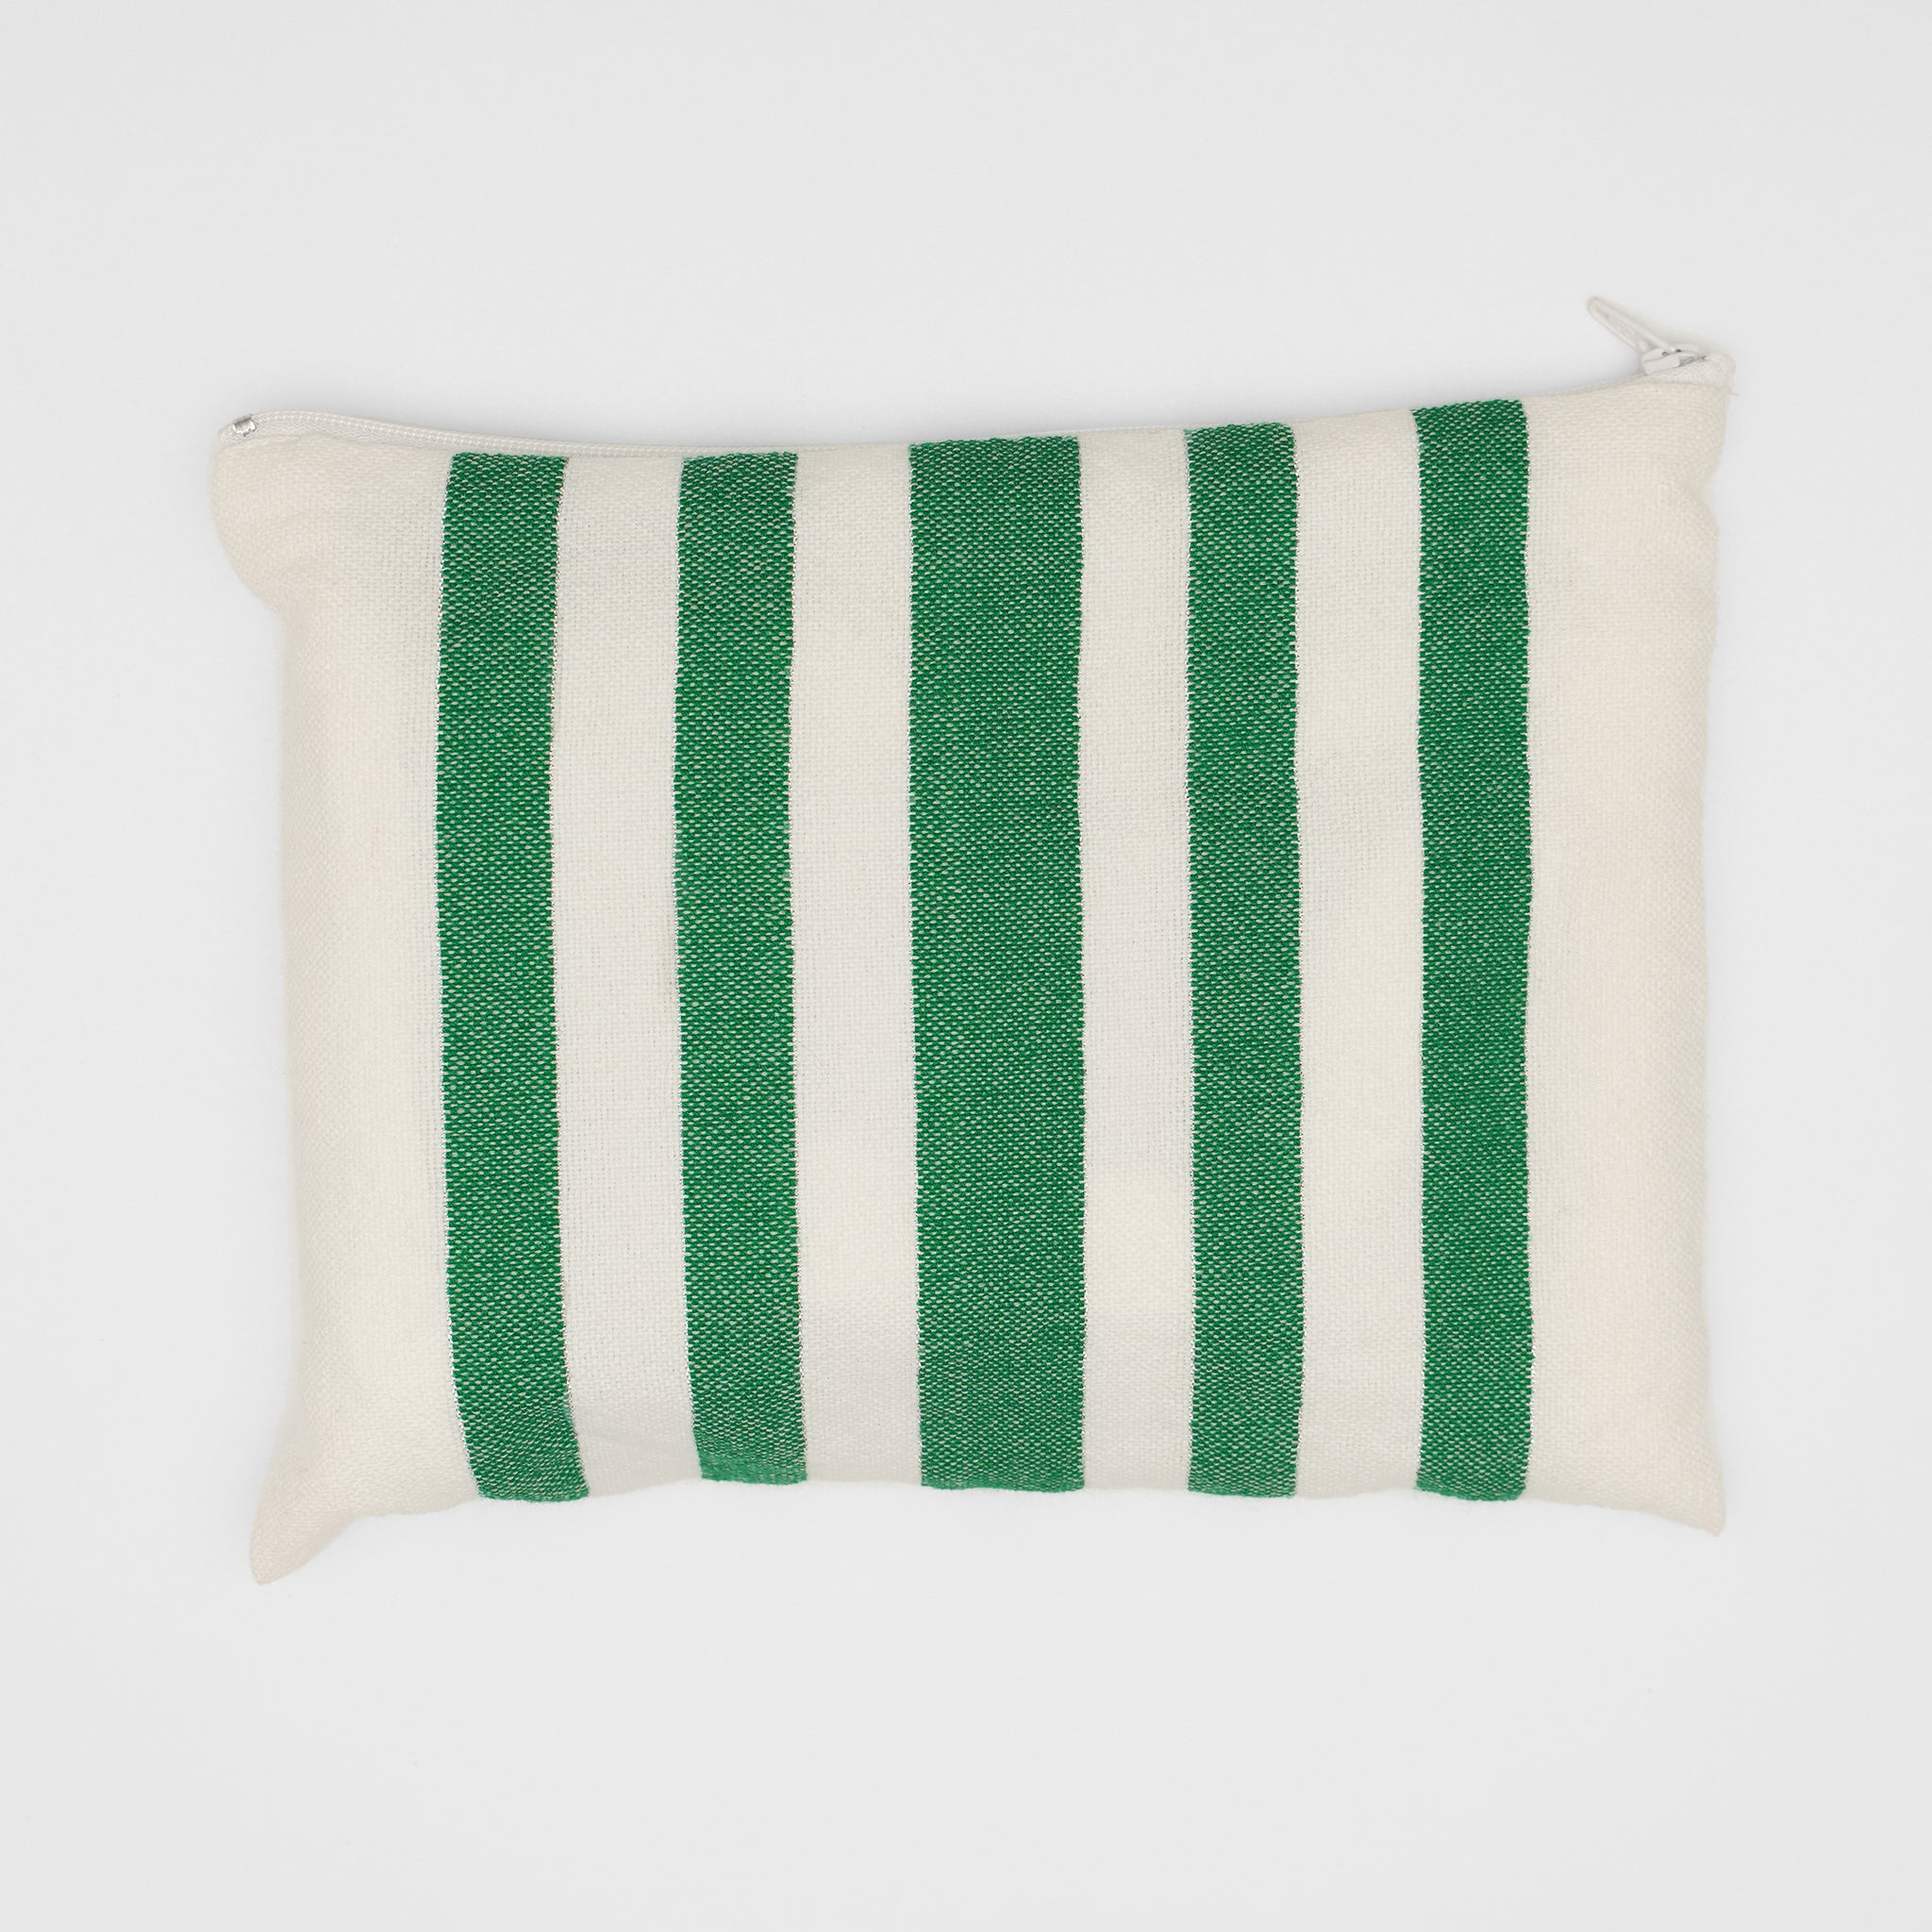 David - Wool Tallit - Wide Green stripes with Silver